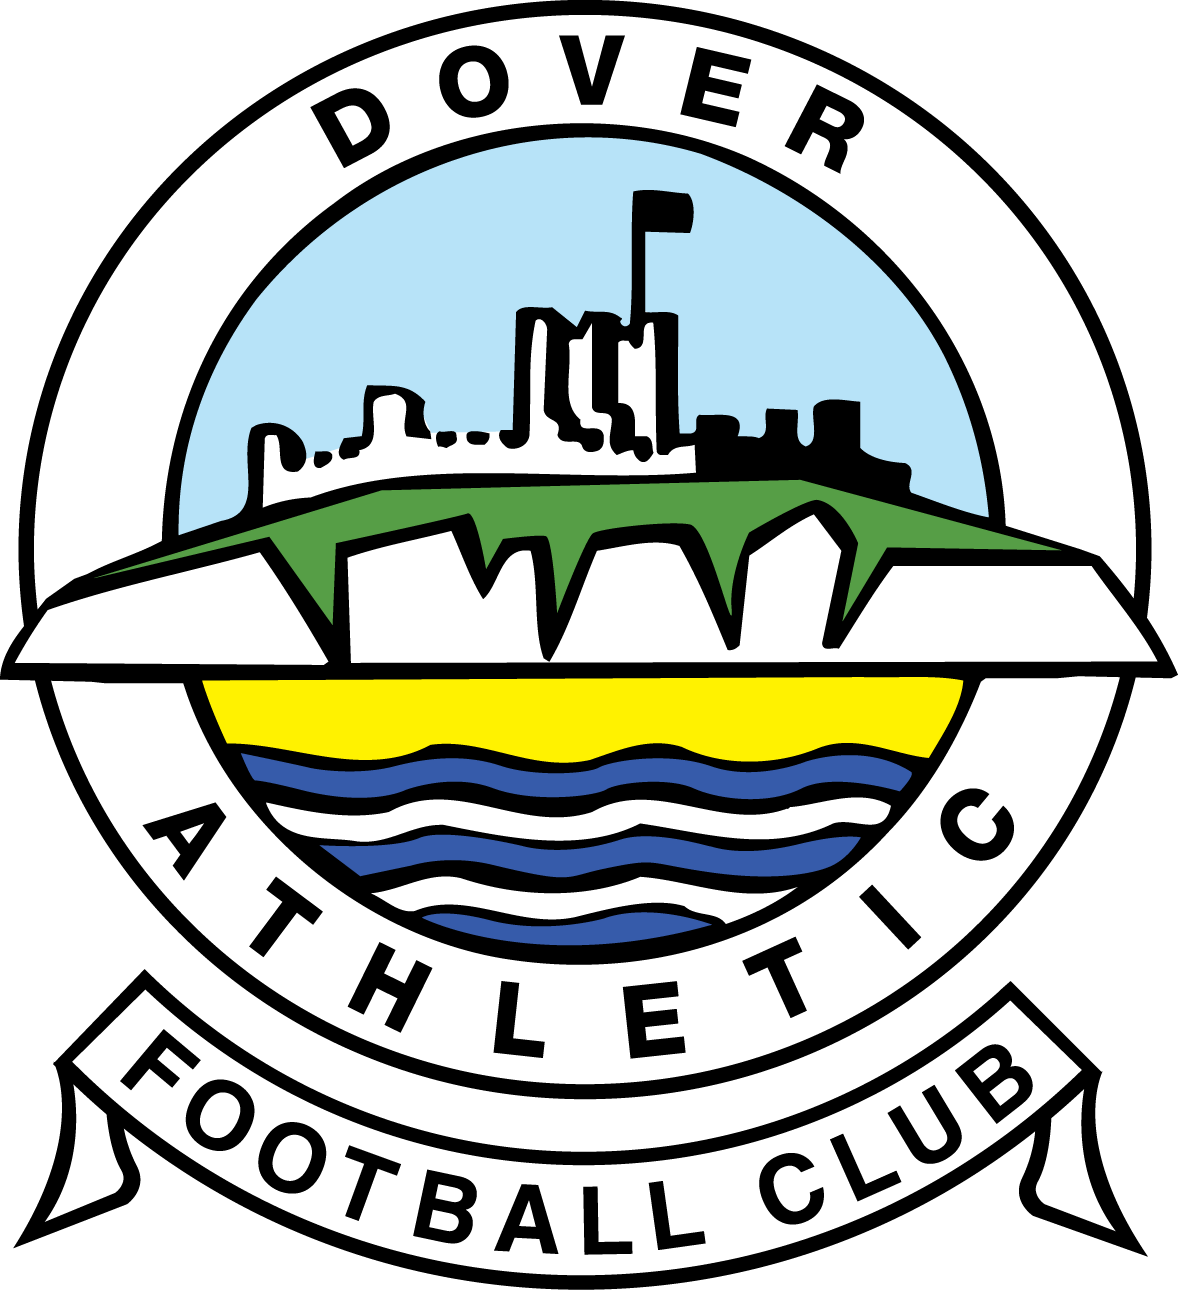 DOVER ATHLETIC FC